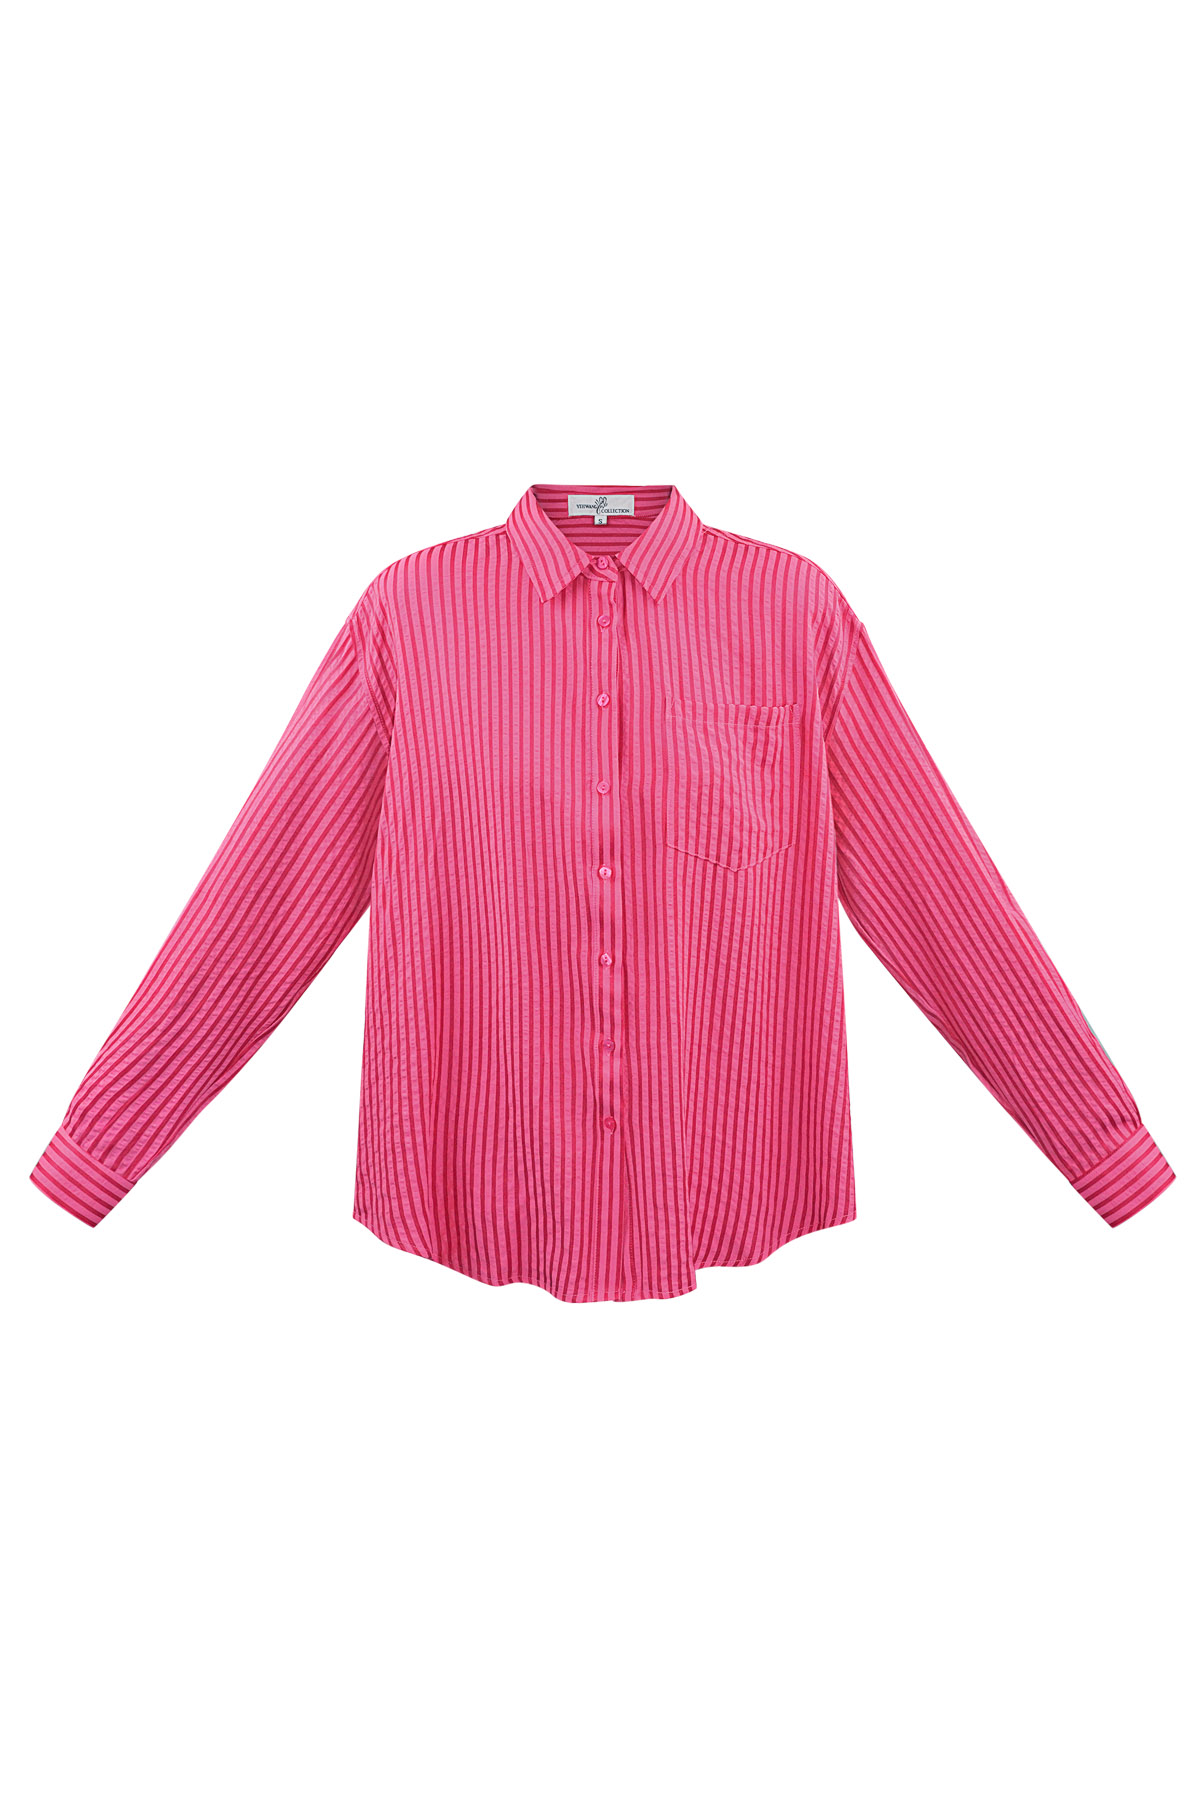 Striped blouse - red pink